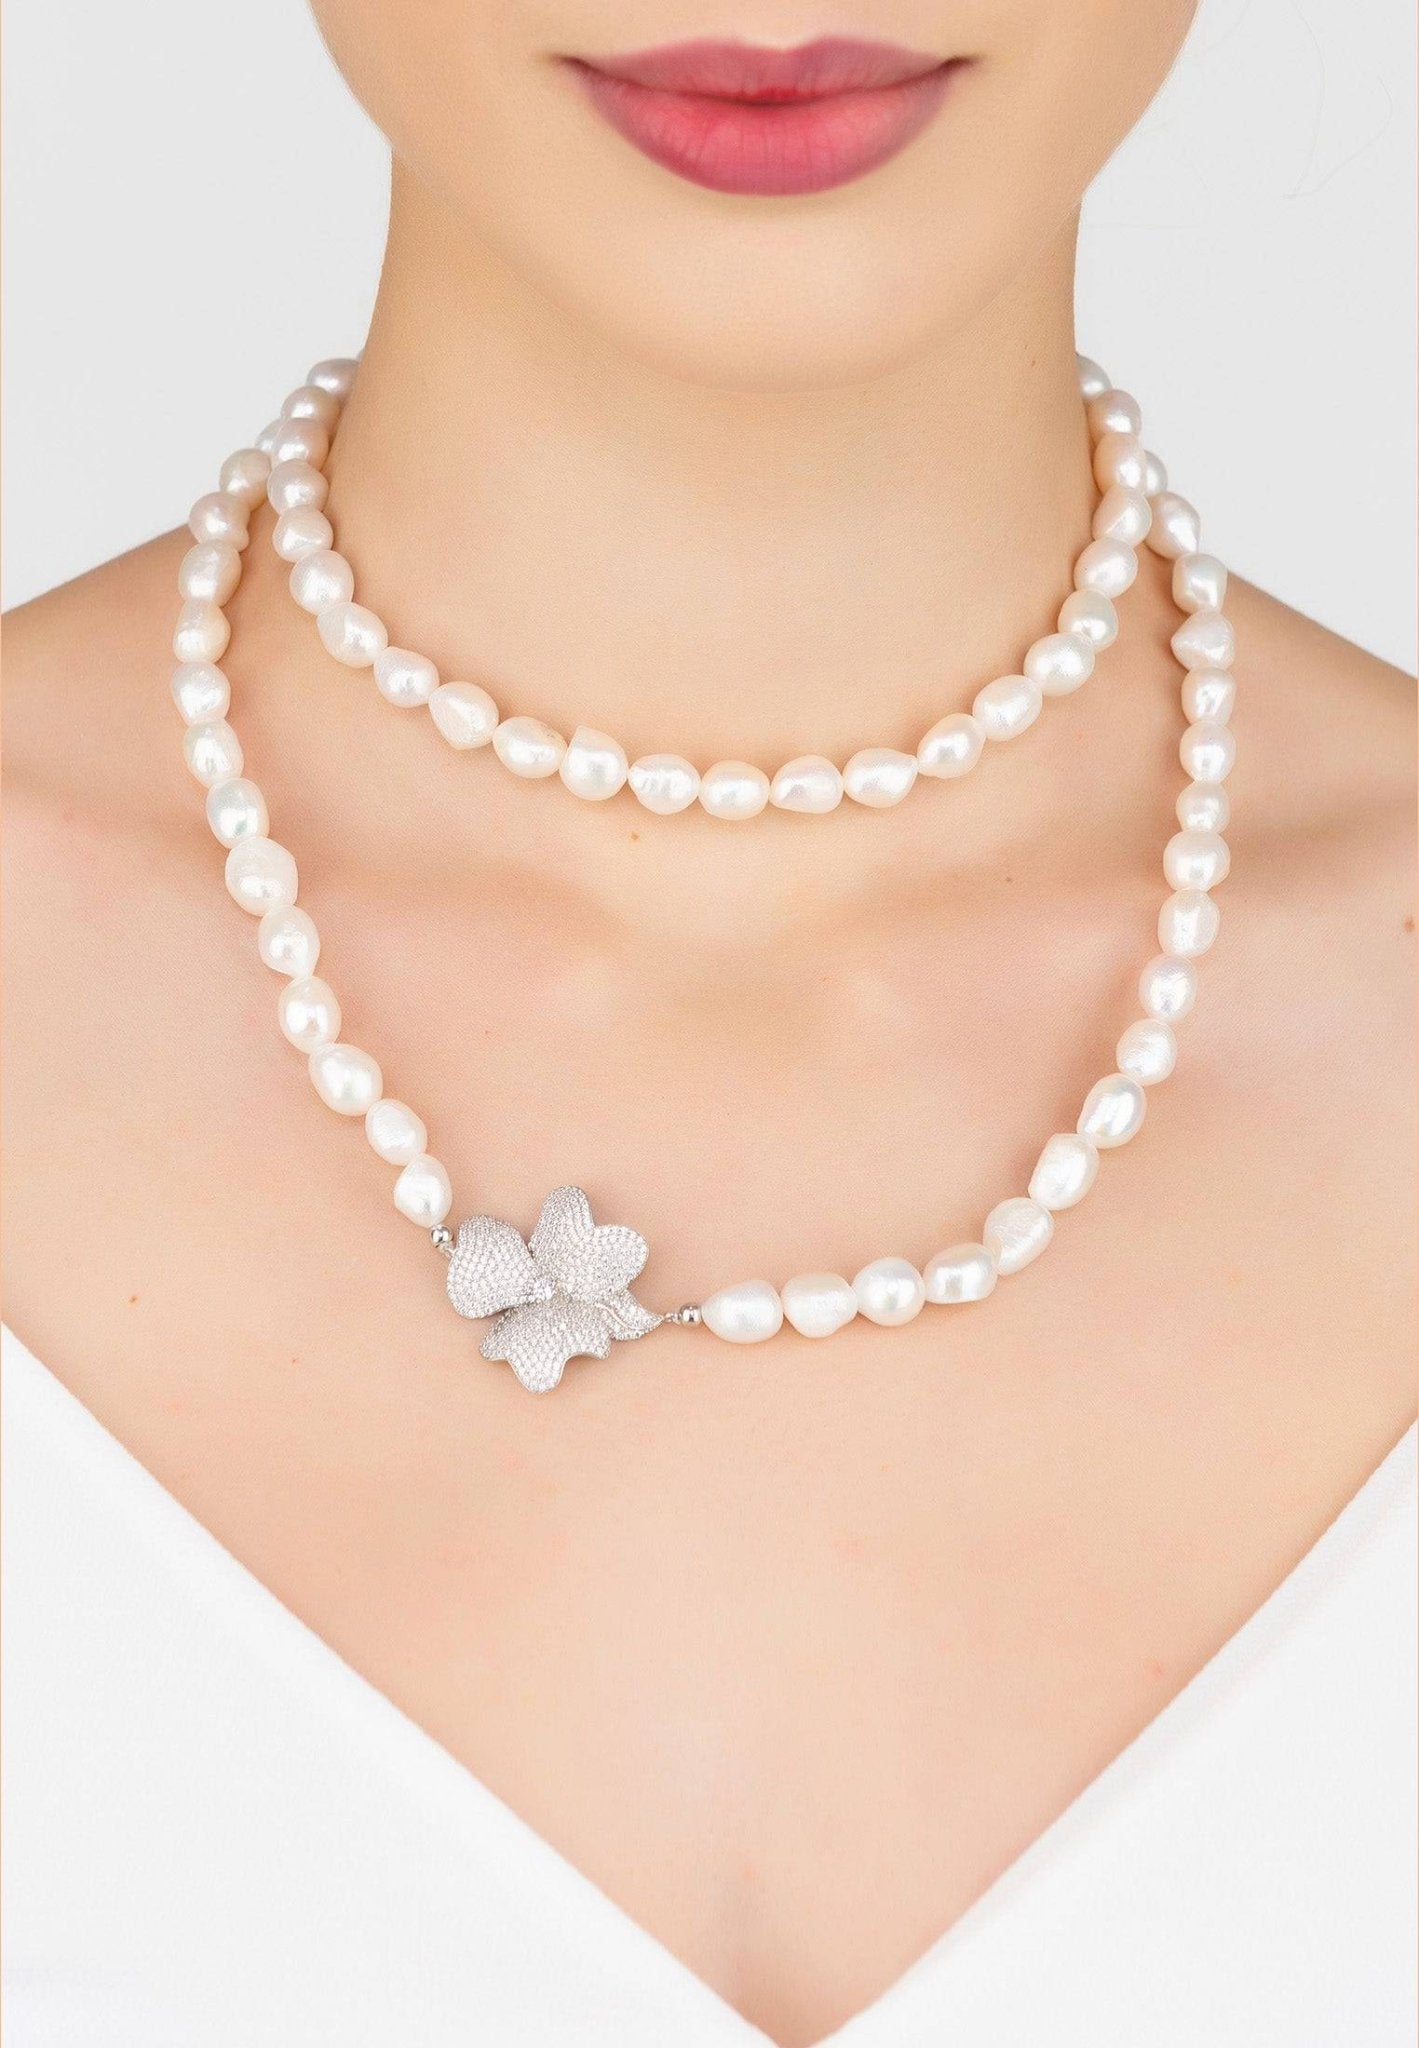 Flower Pearl Gemstone Long Necklace White Cz Silver - LATELITA Necklaces